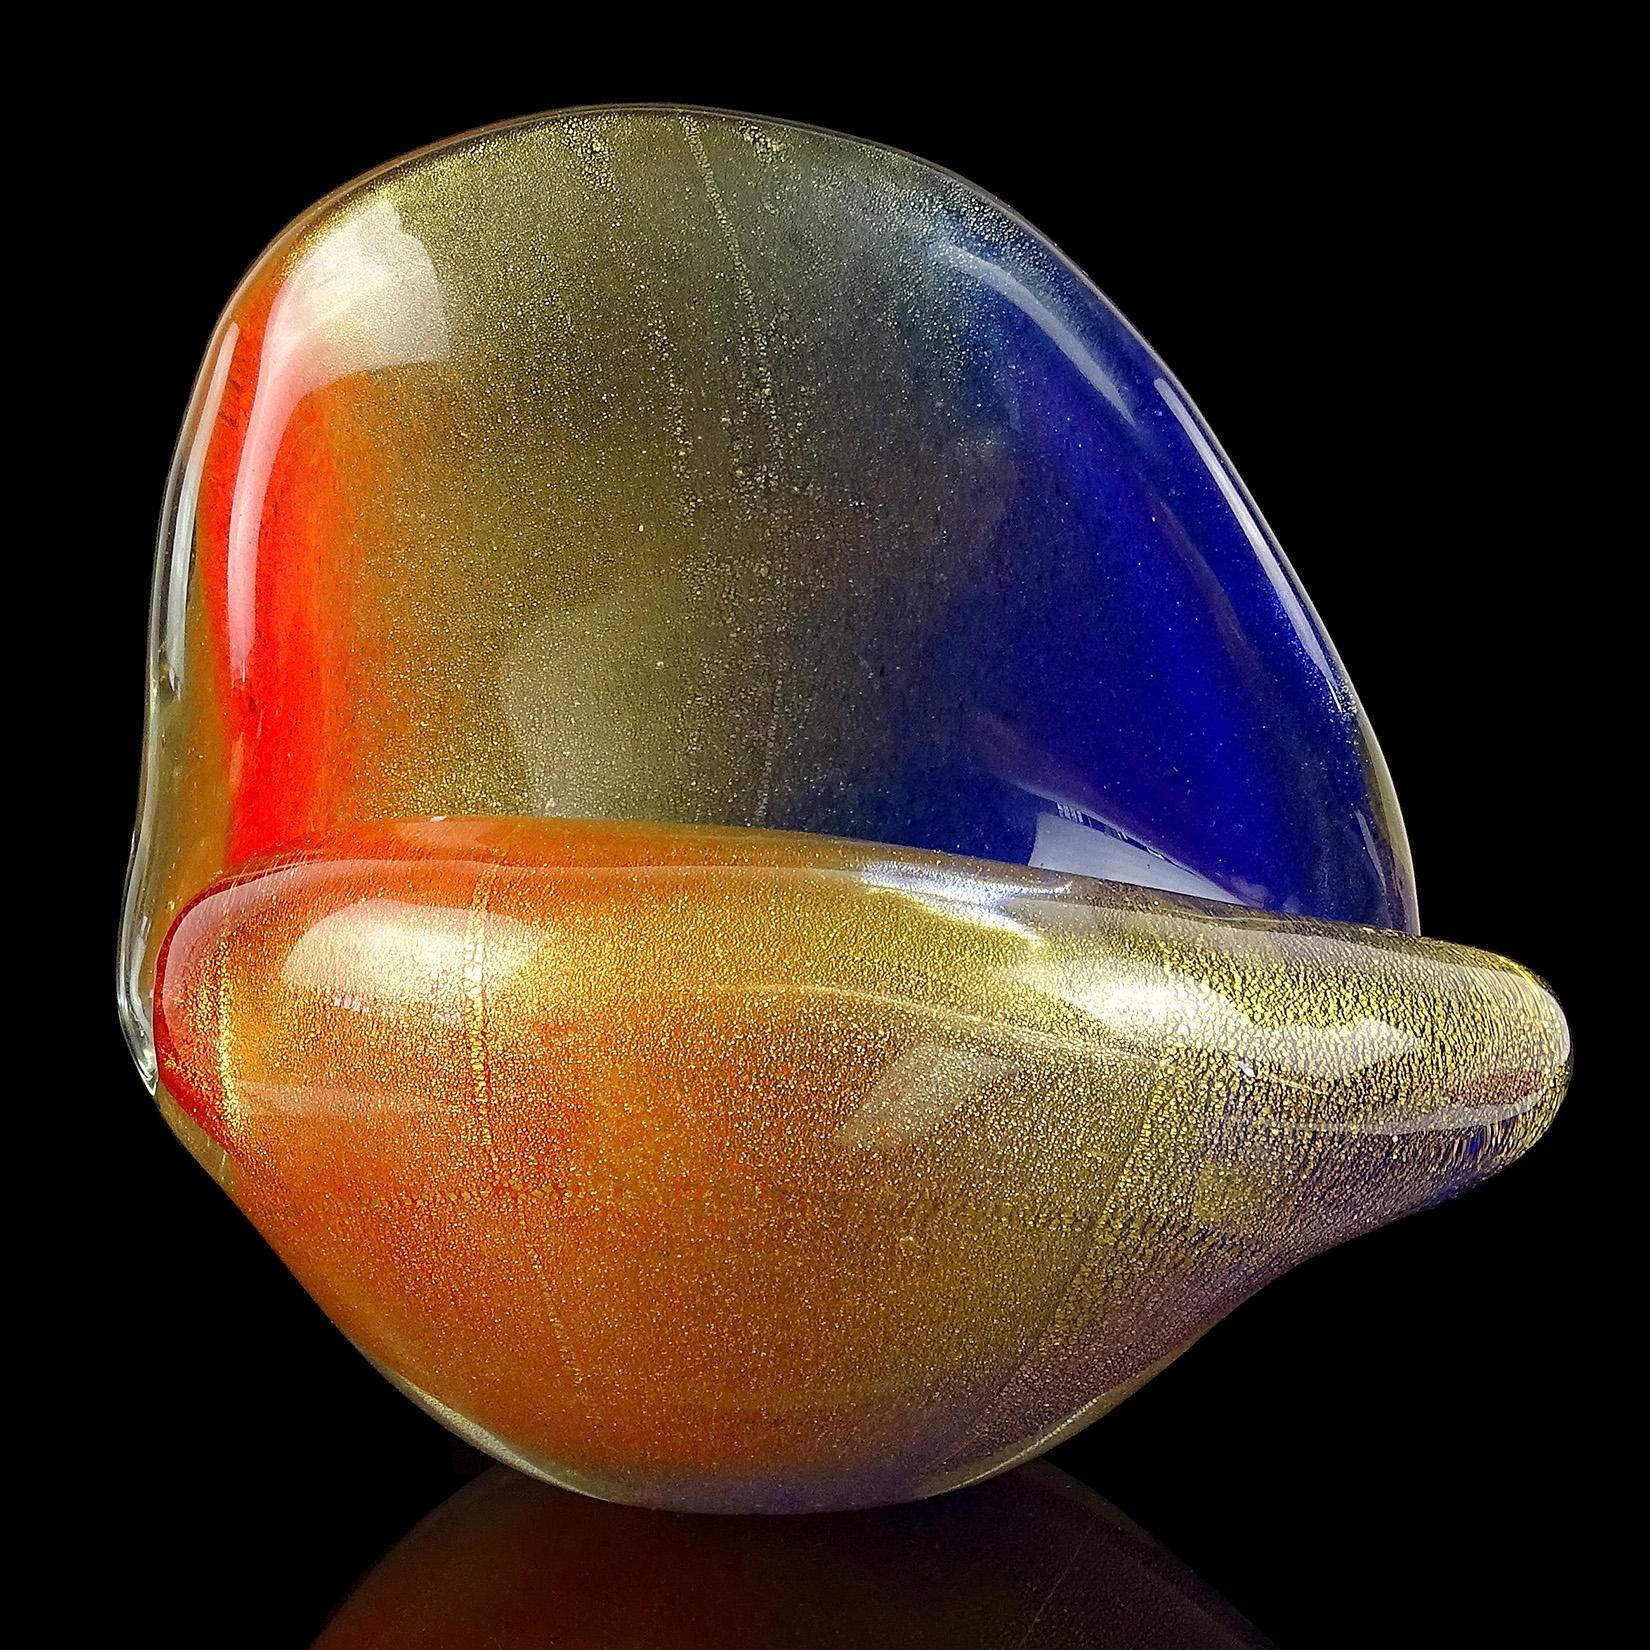 Rare and unique vintage Murano hand blown gold flecks with orange and blue pigments Italian art glass conch seashell sculpture. Documented to designer Archimede Seguso, in the Pulveri design, circa 1950s. It is very unusual to find this technique